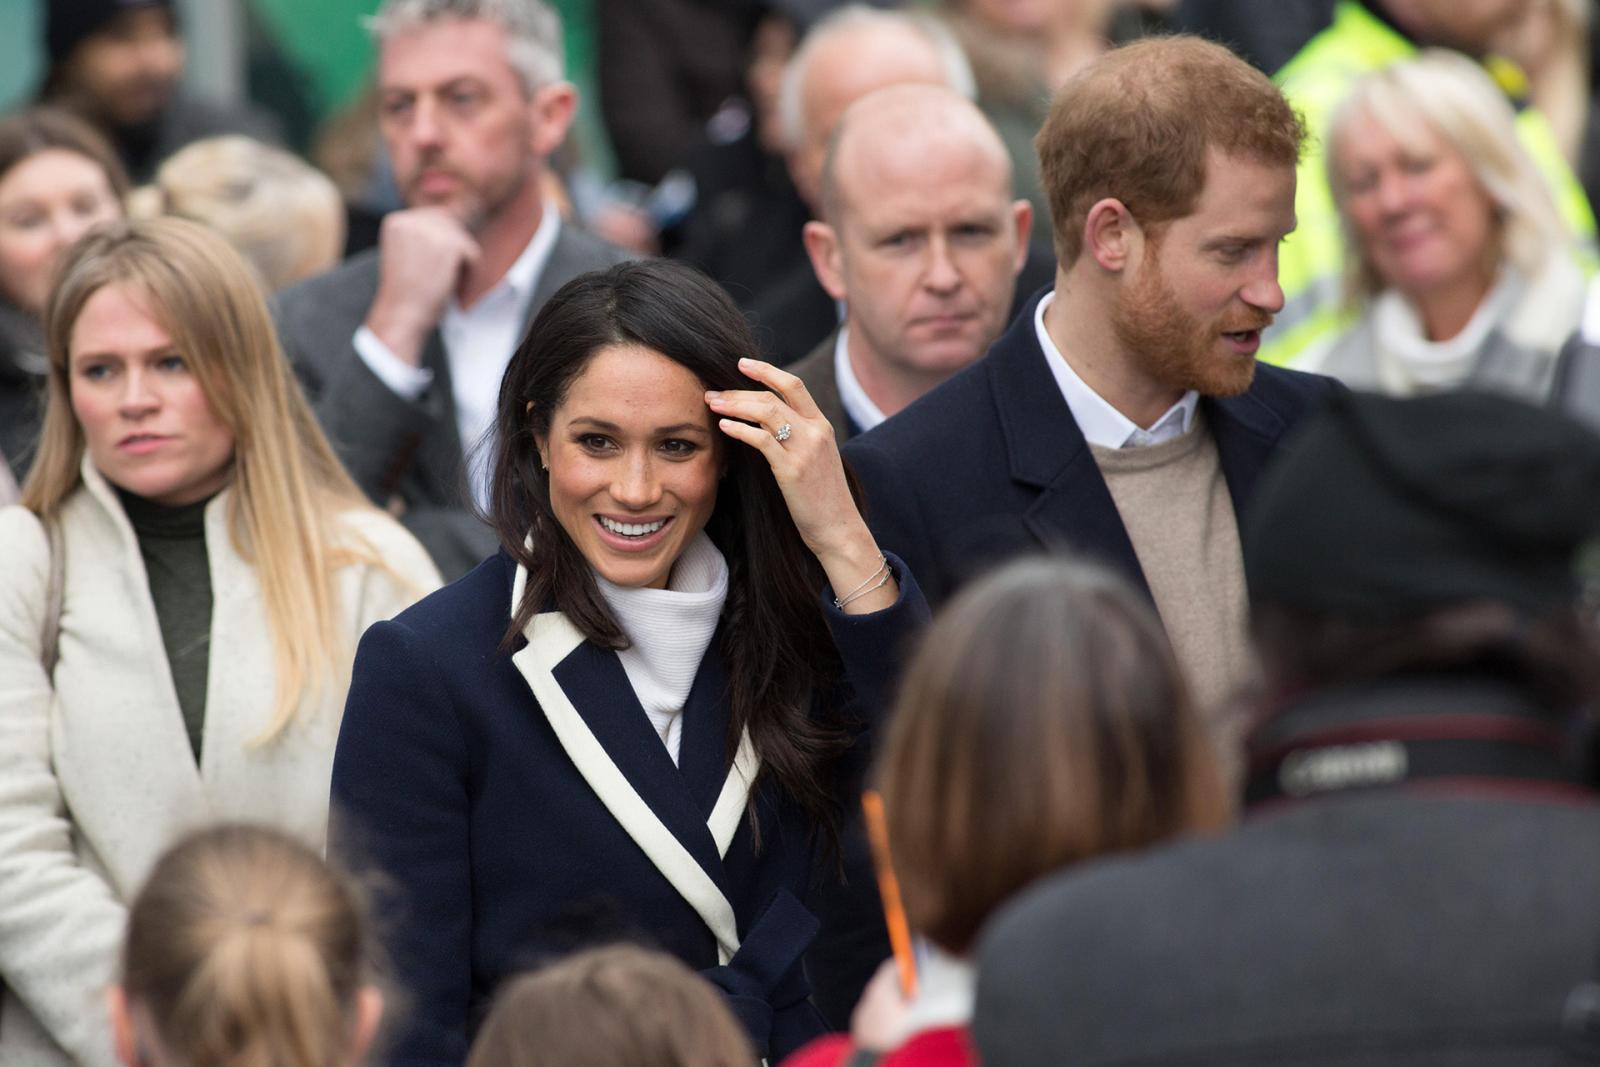 7 Fascinating Things You Didn't Know About Meghan Markle - image 1